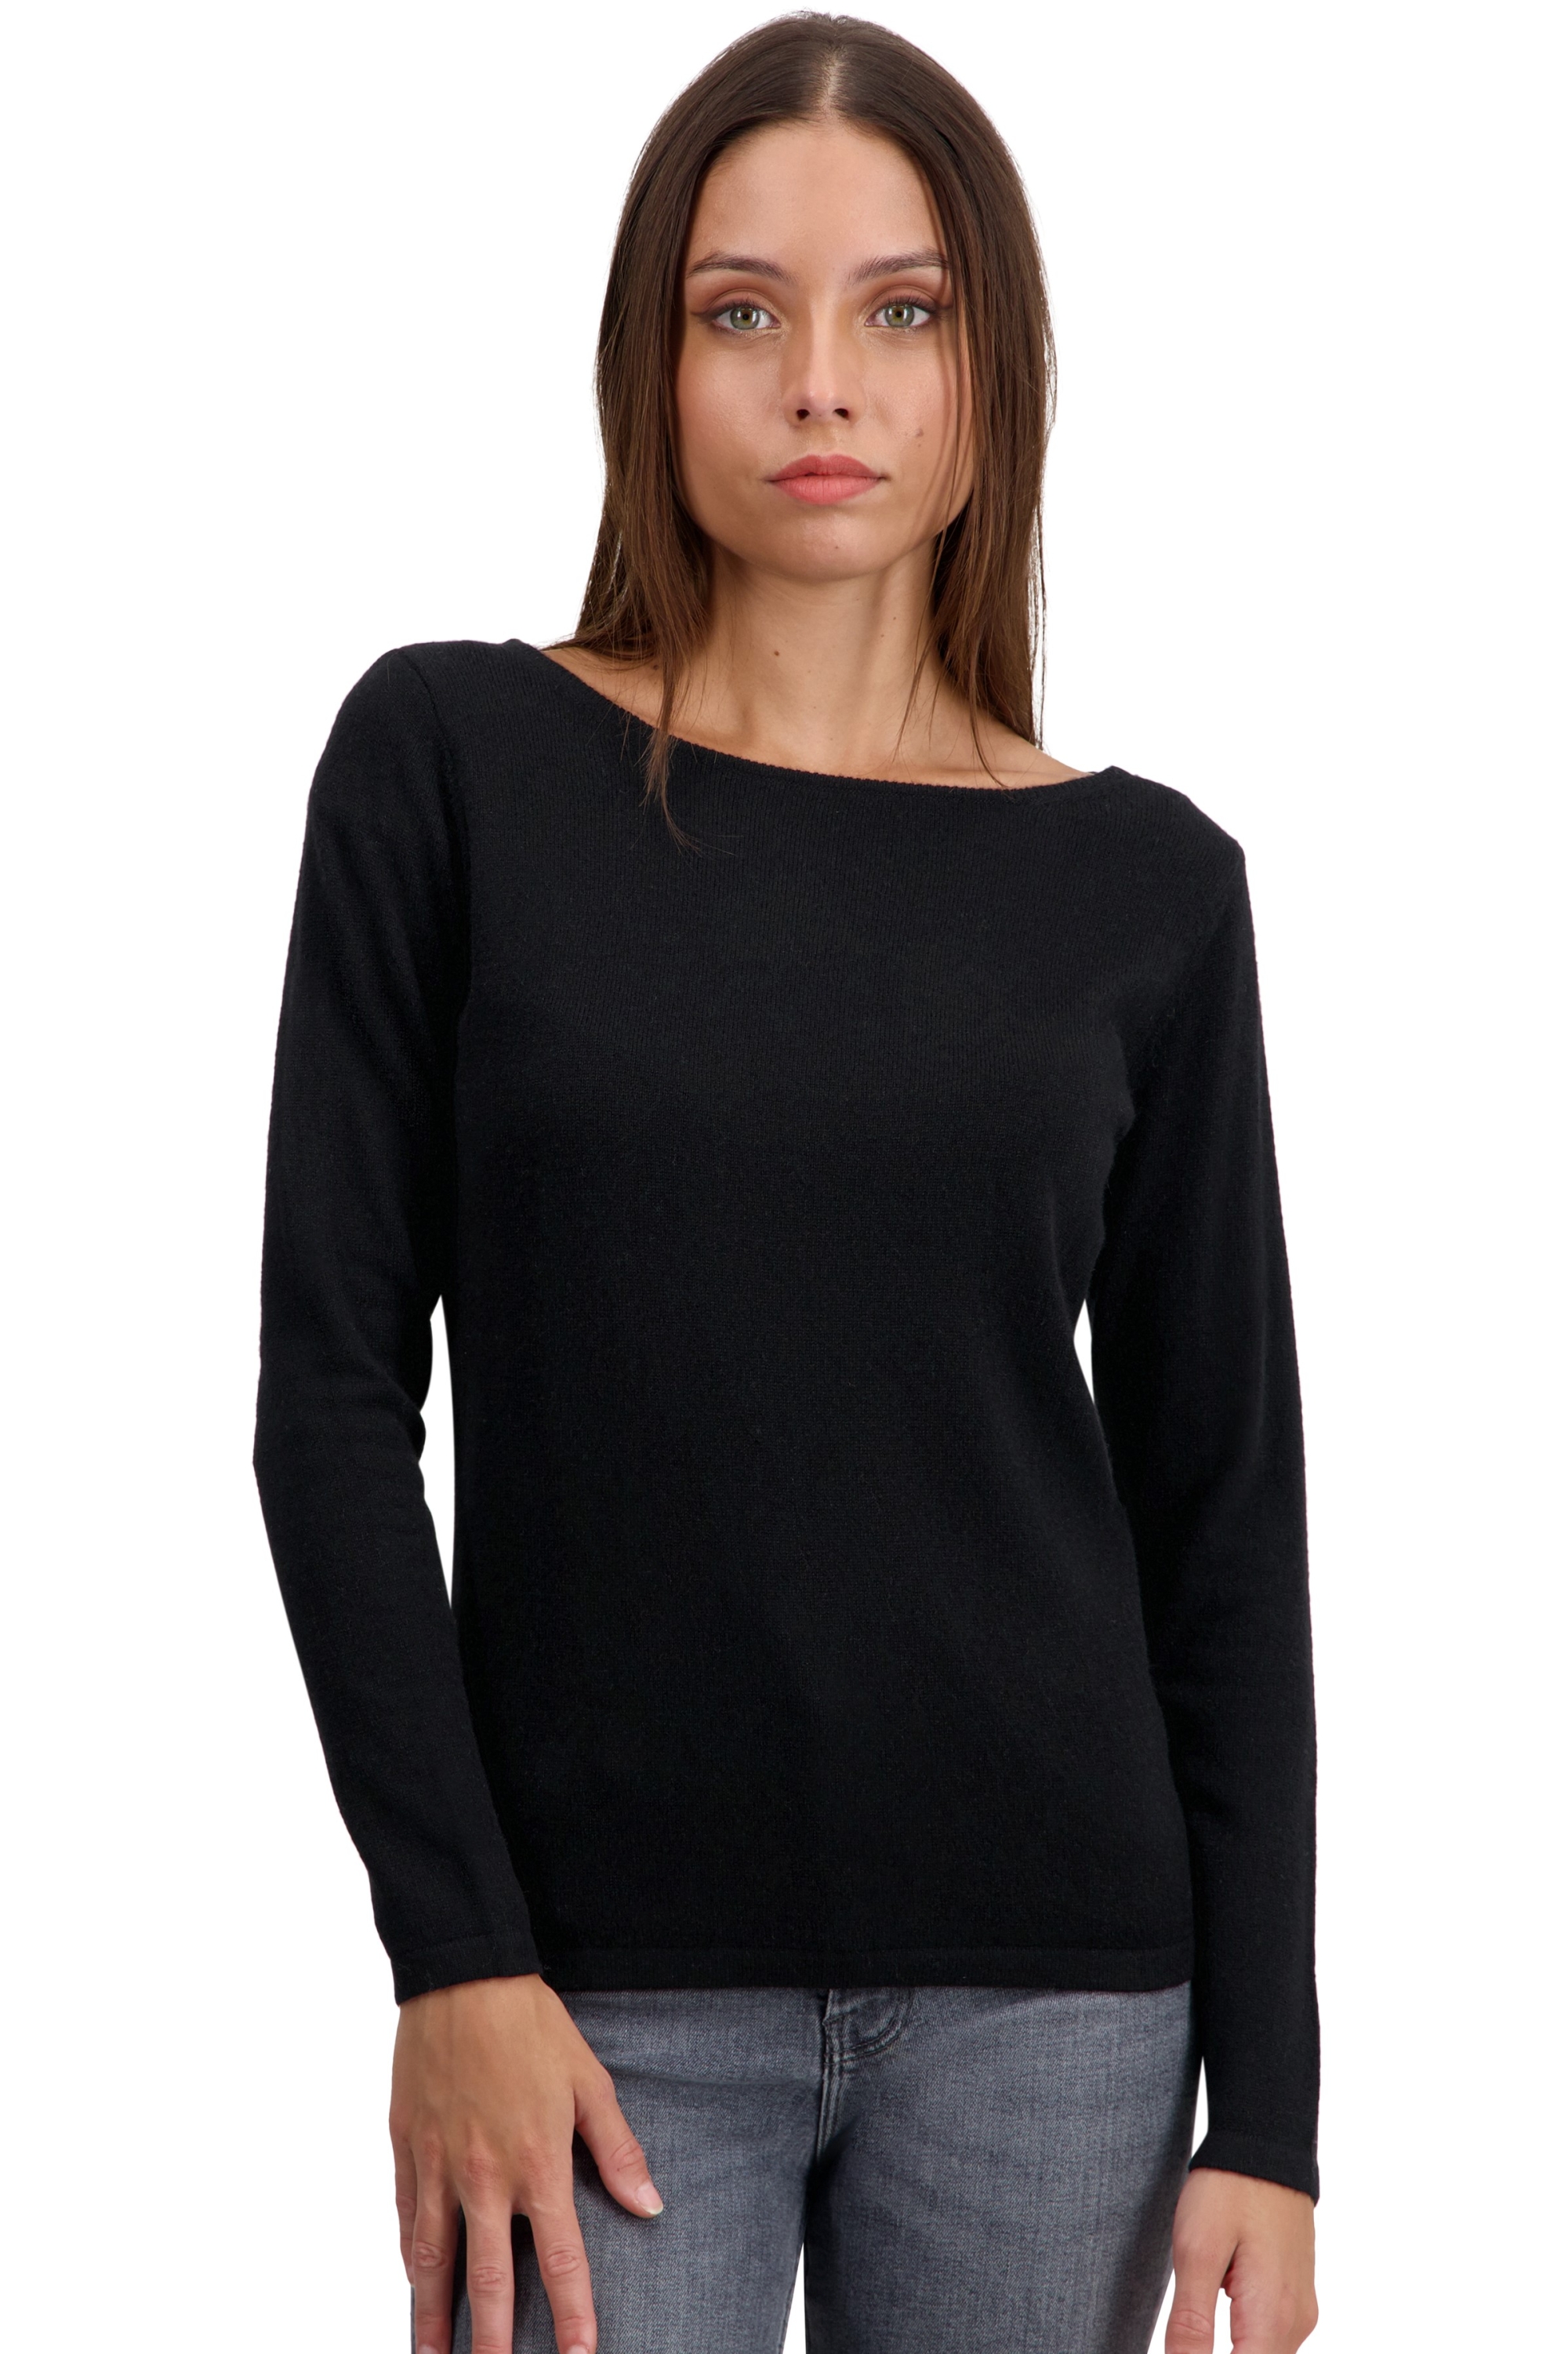 Cashmere ladies tennessy first black l